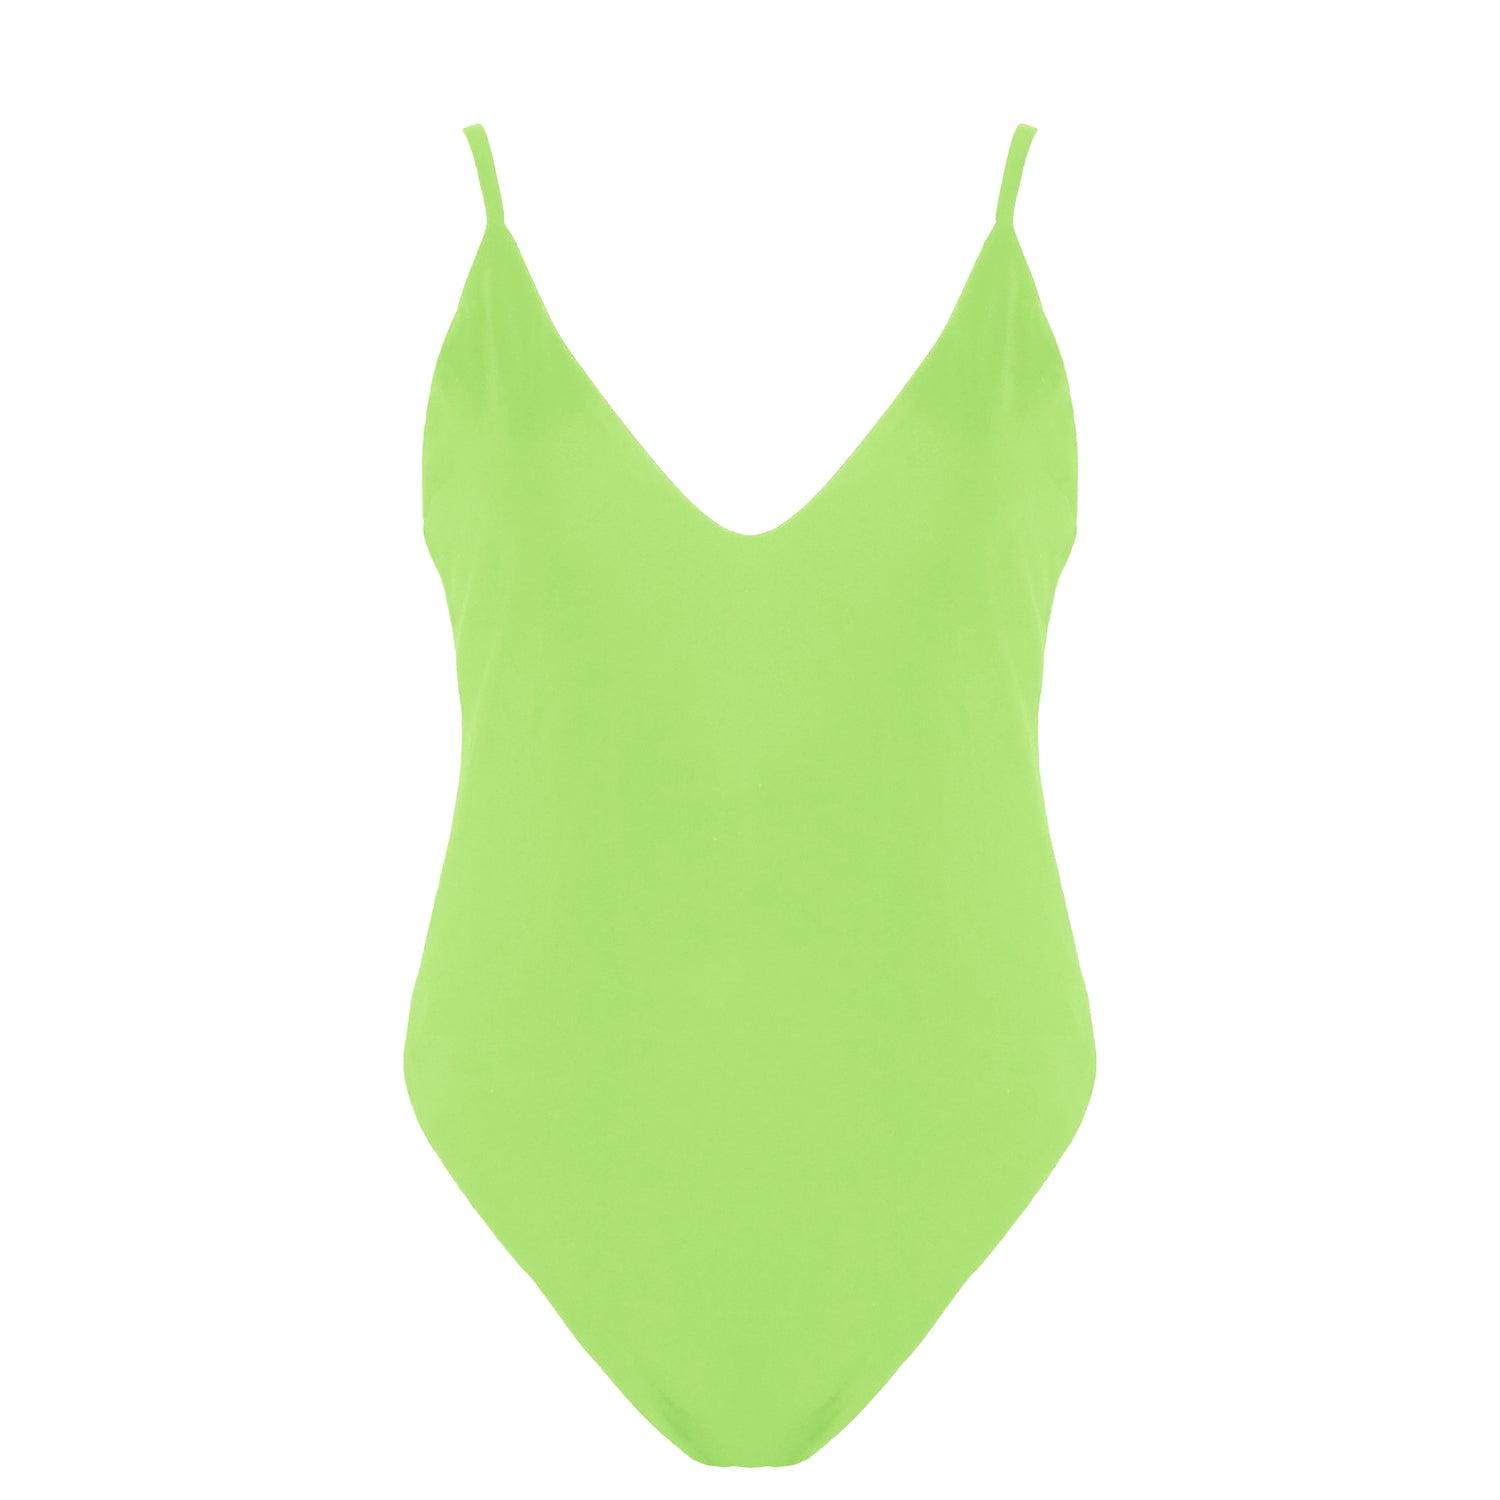 Light neon green simplistic plunging v-neck one piece swimsuit with a low v-back, high cut legs and full coverage.